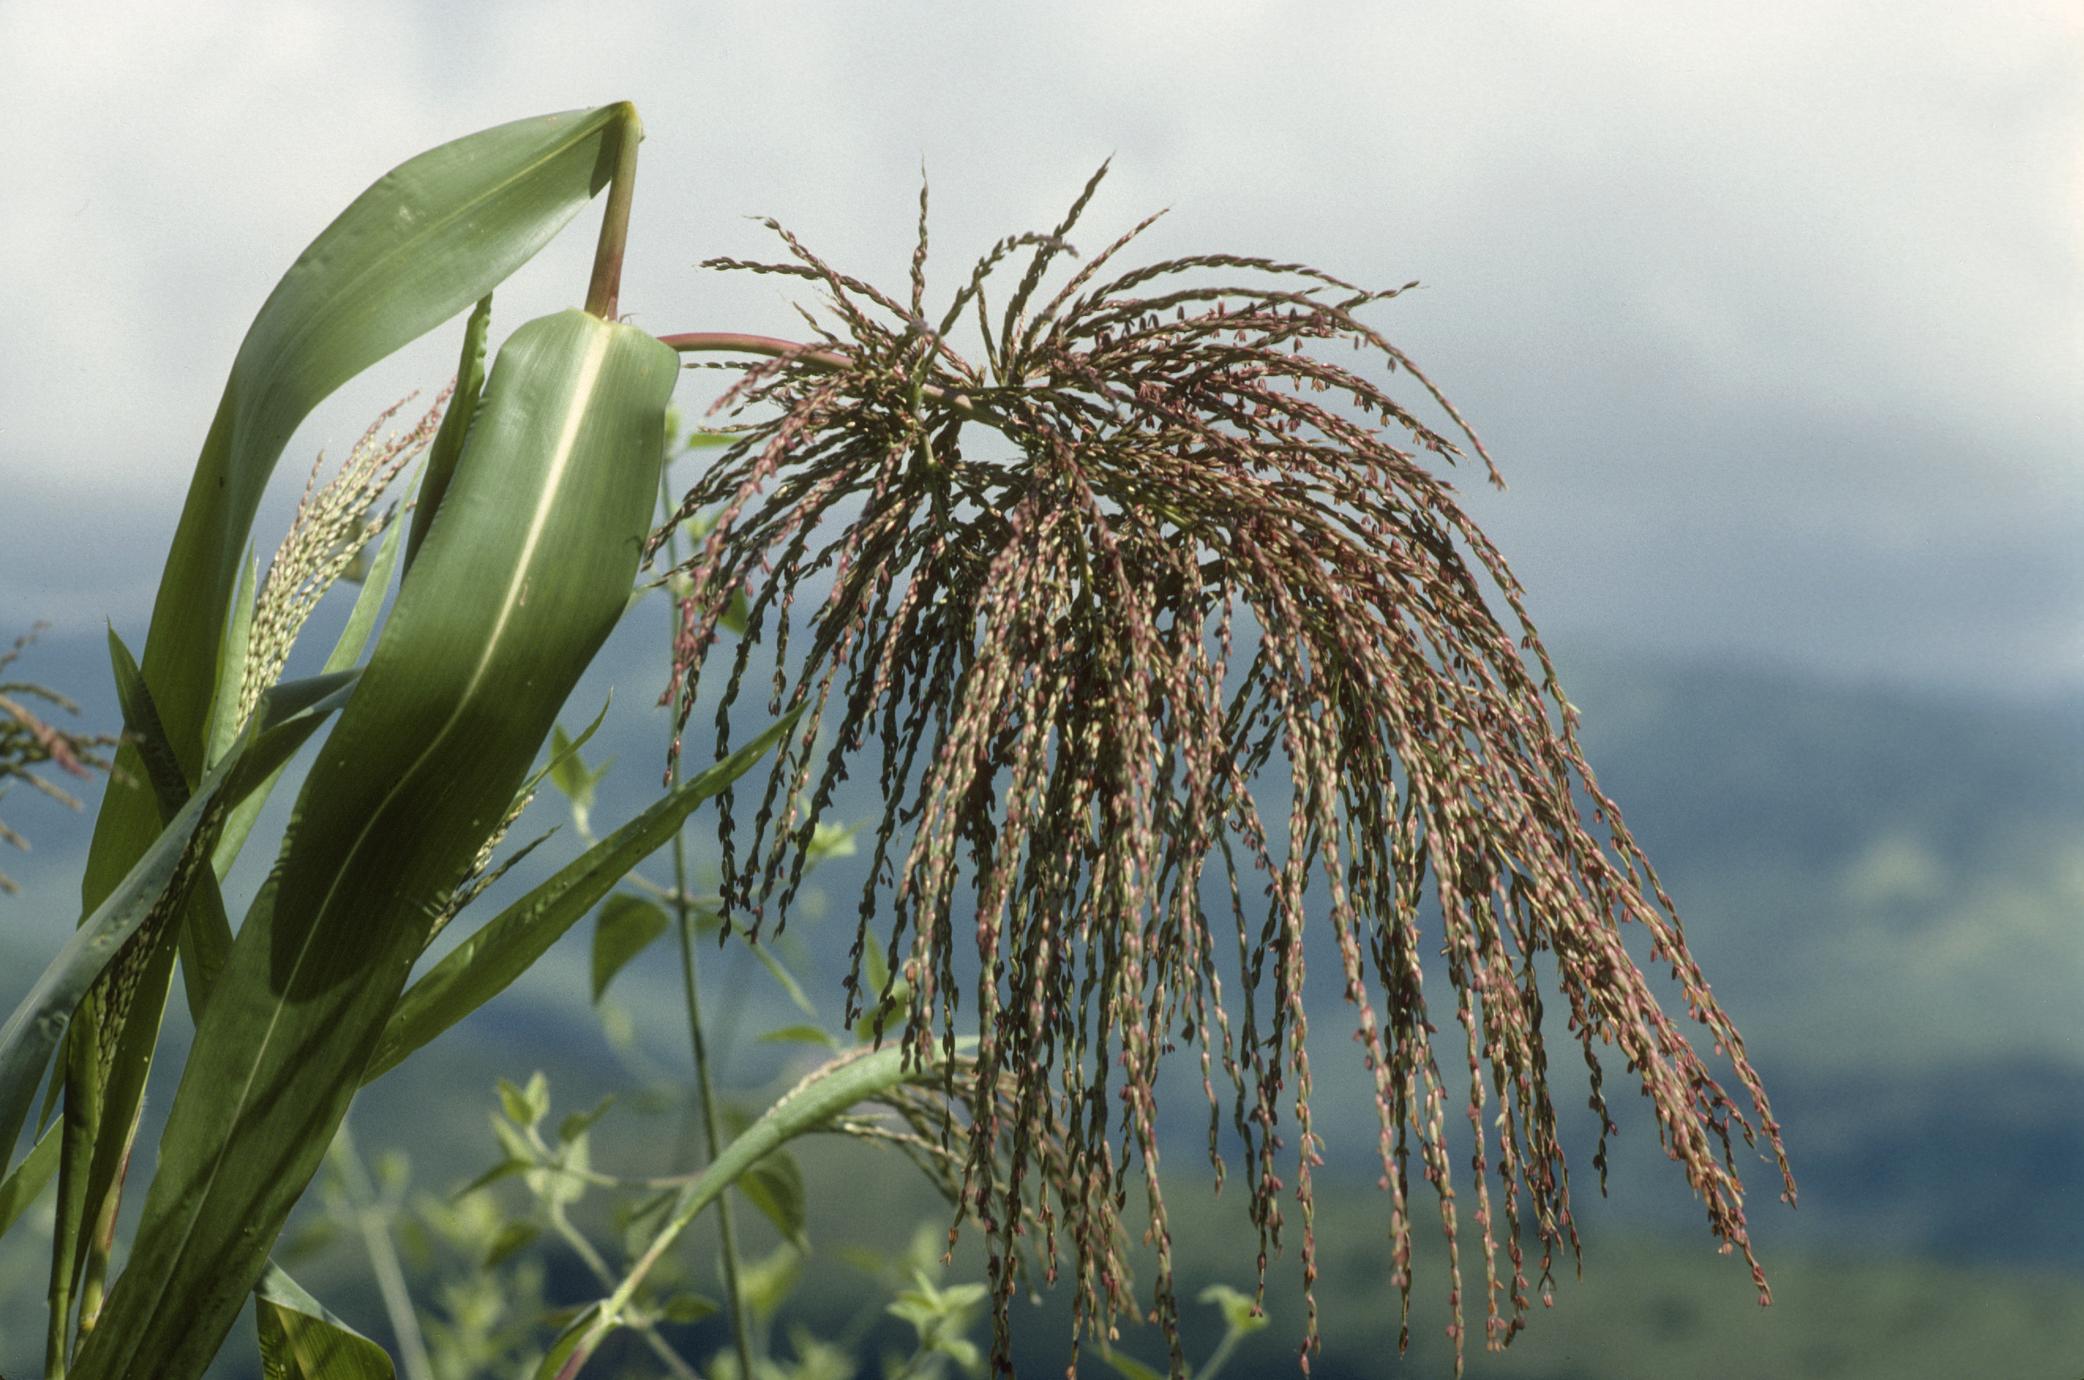 Photograph of the tassel (male inflorescence) of a Balasas teosinte plant. The inflorescence is nodding.